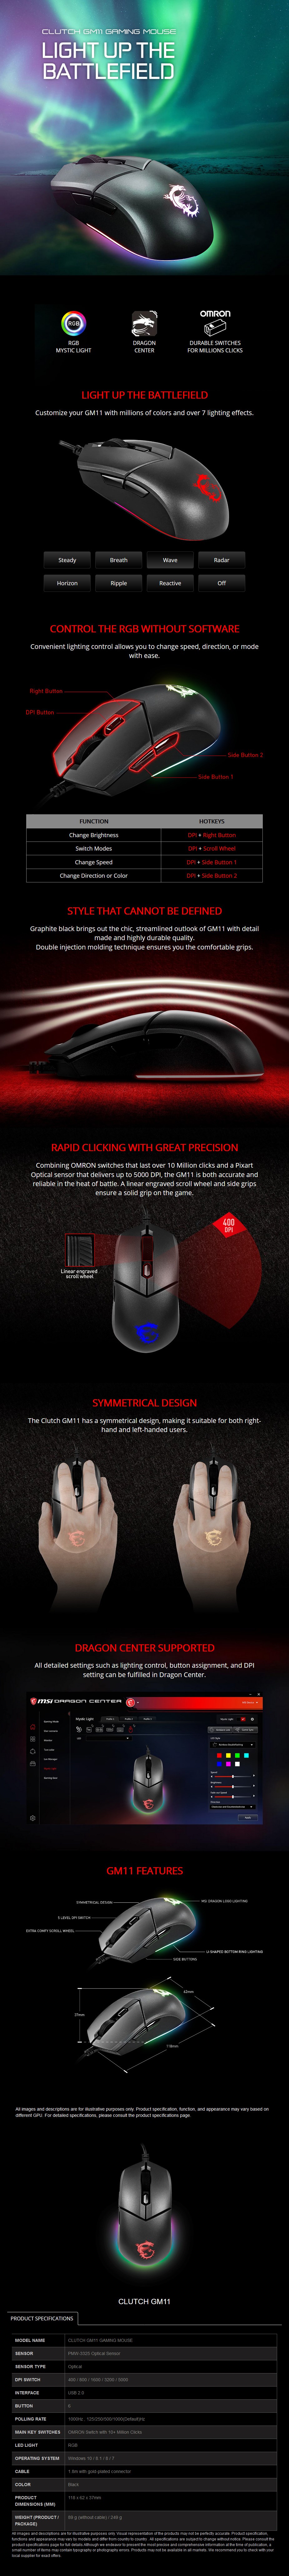 A large marketing image providing additional information about the product MSI Clutch GM11 RGB Gaming Mouse - Additional alt info not provided